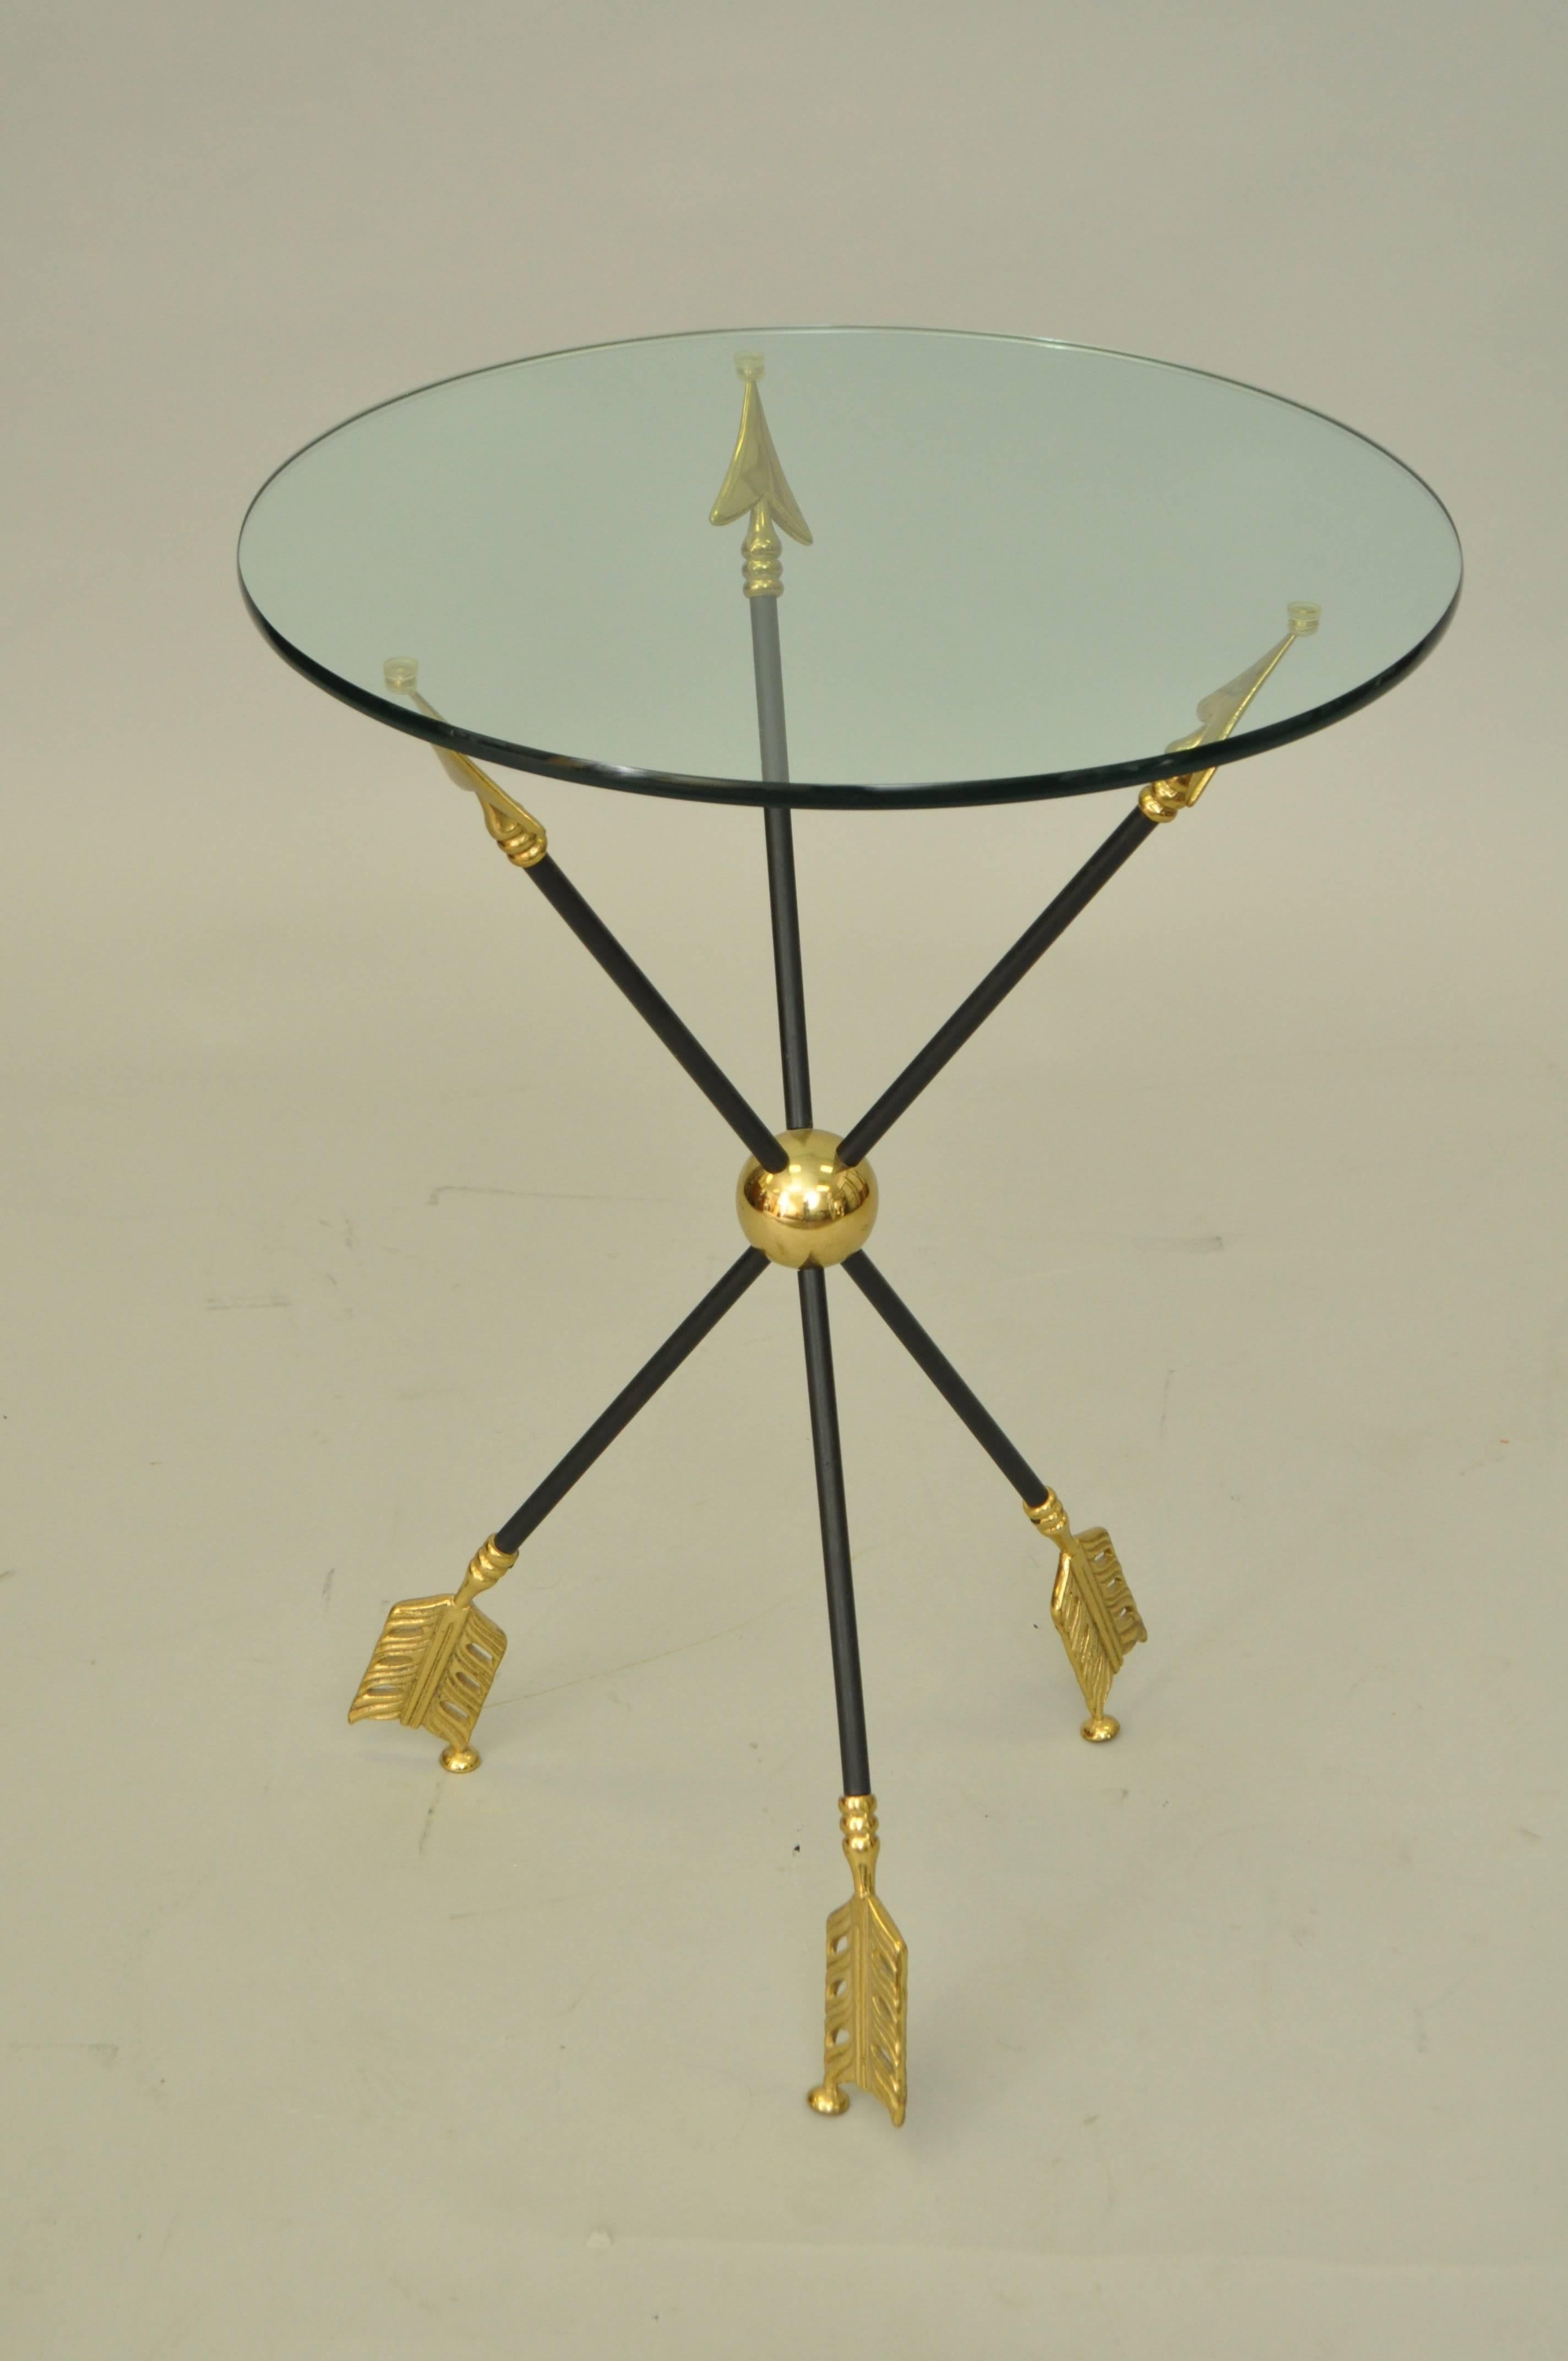 Wonderful vintage neoclassical style tripod side table attributed to Maison Jansen. Item features an 18